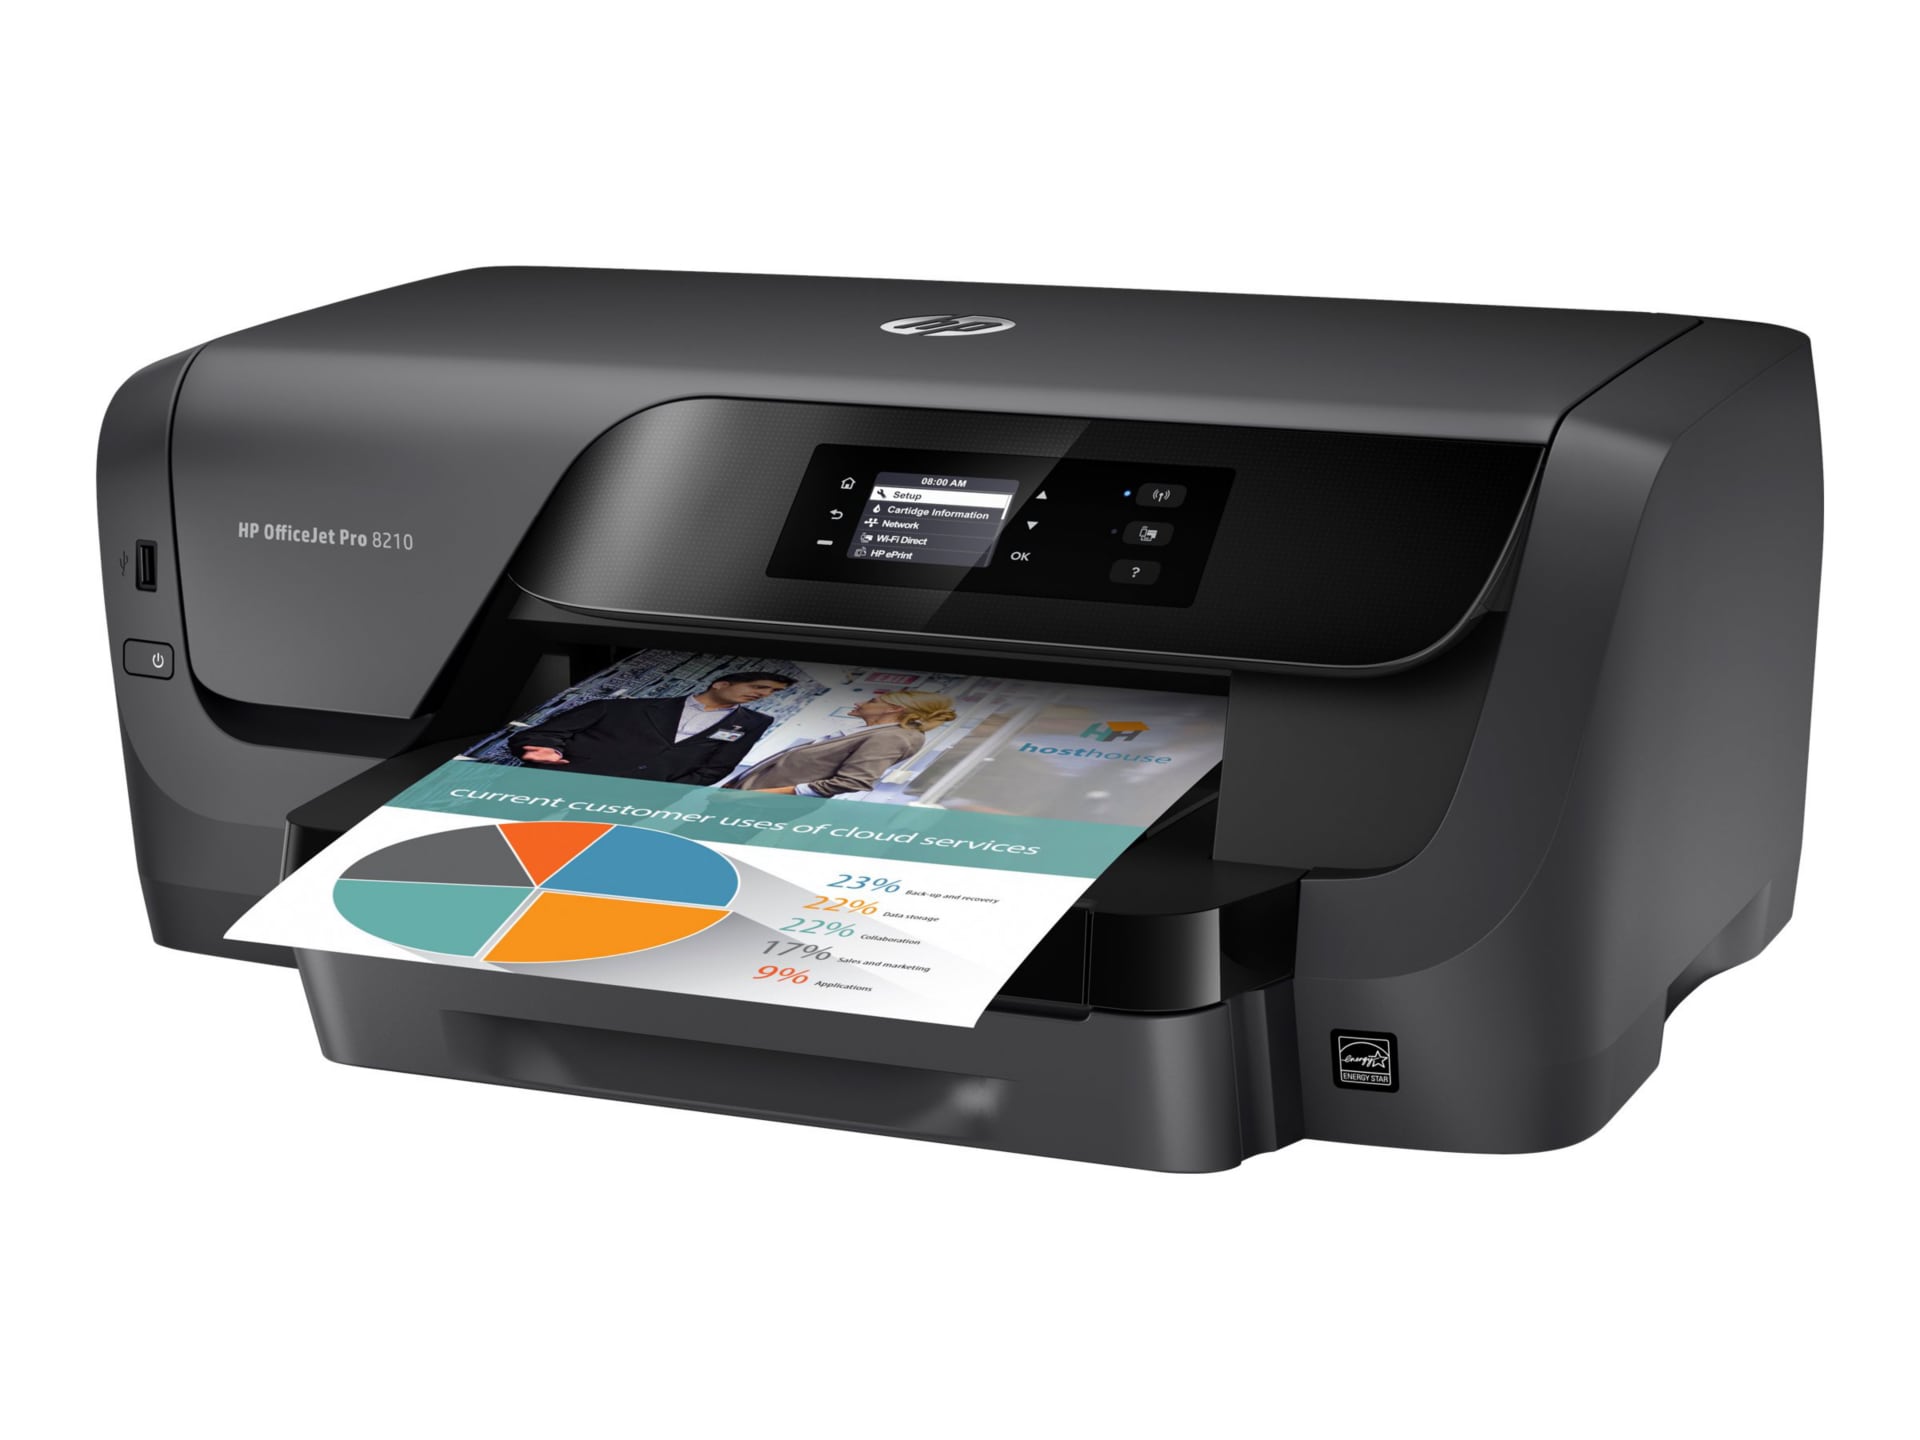 When should I buy a new printer? – Printer Guides and Tips from LD Products